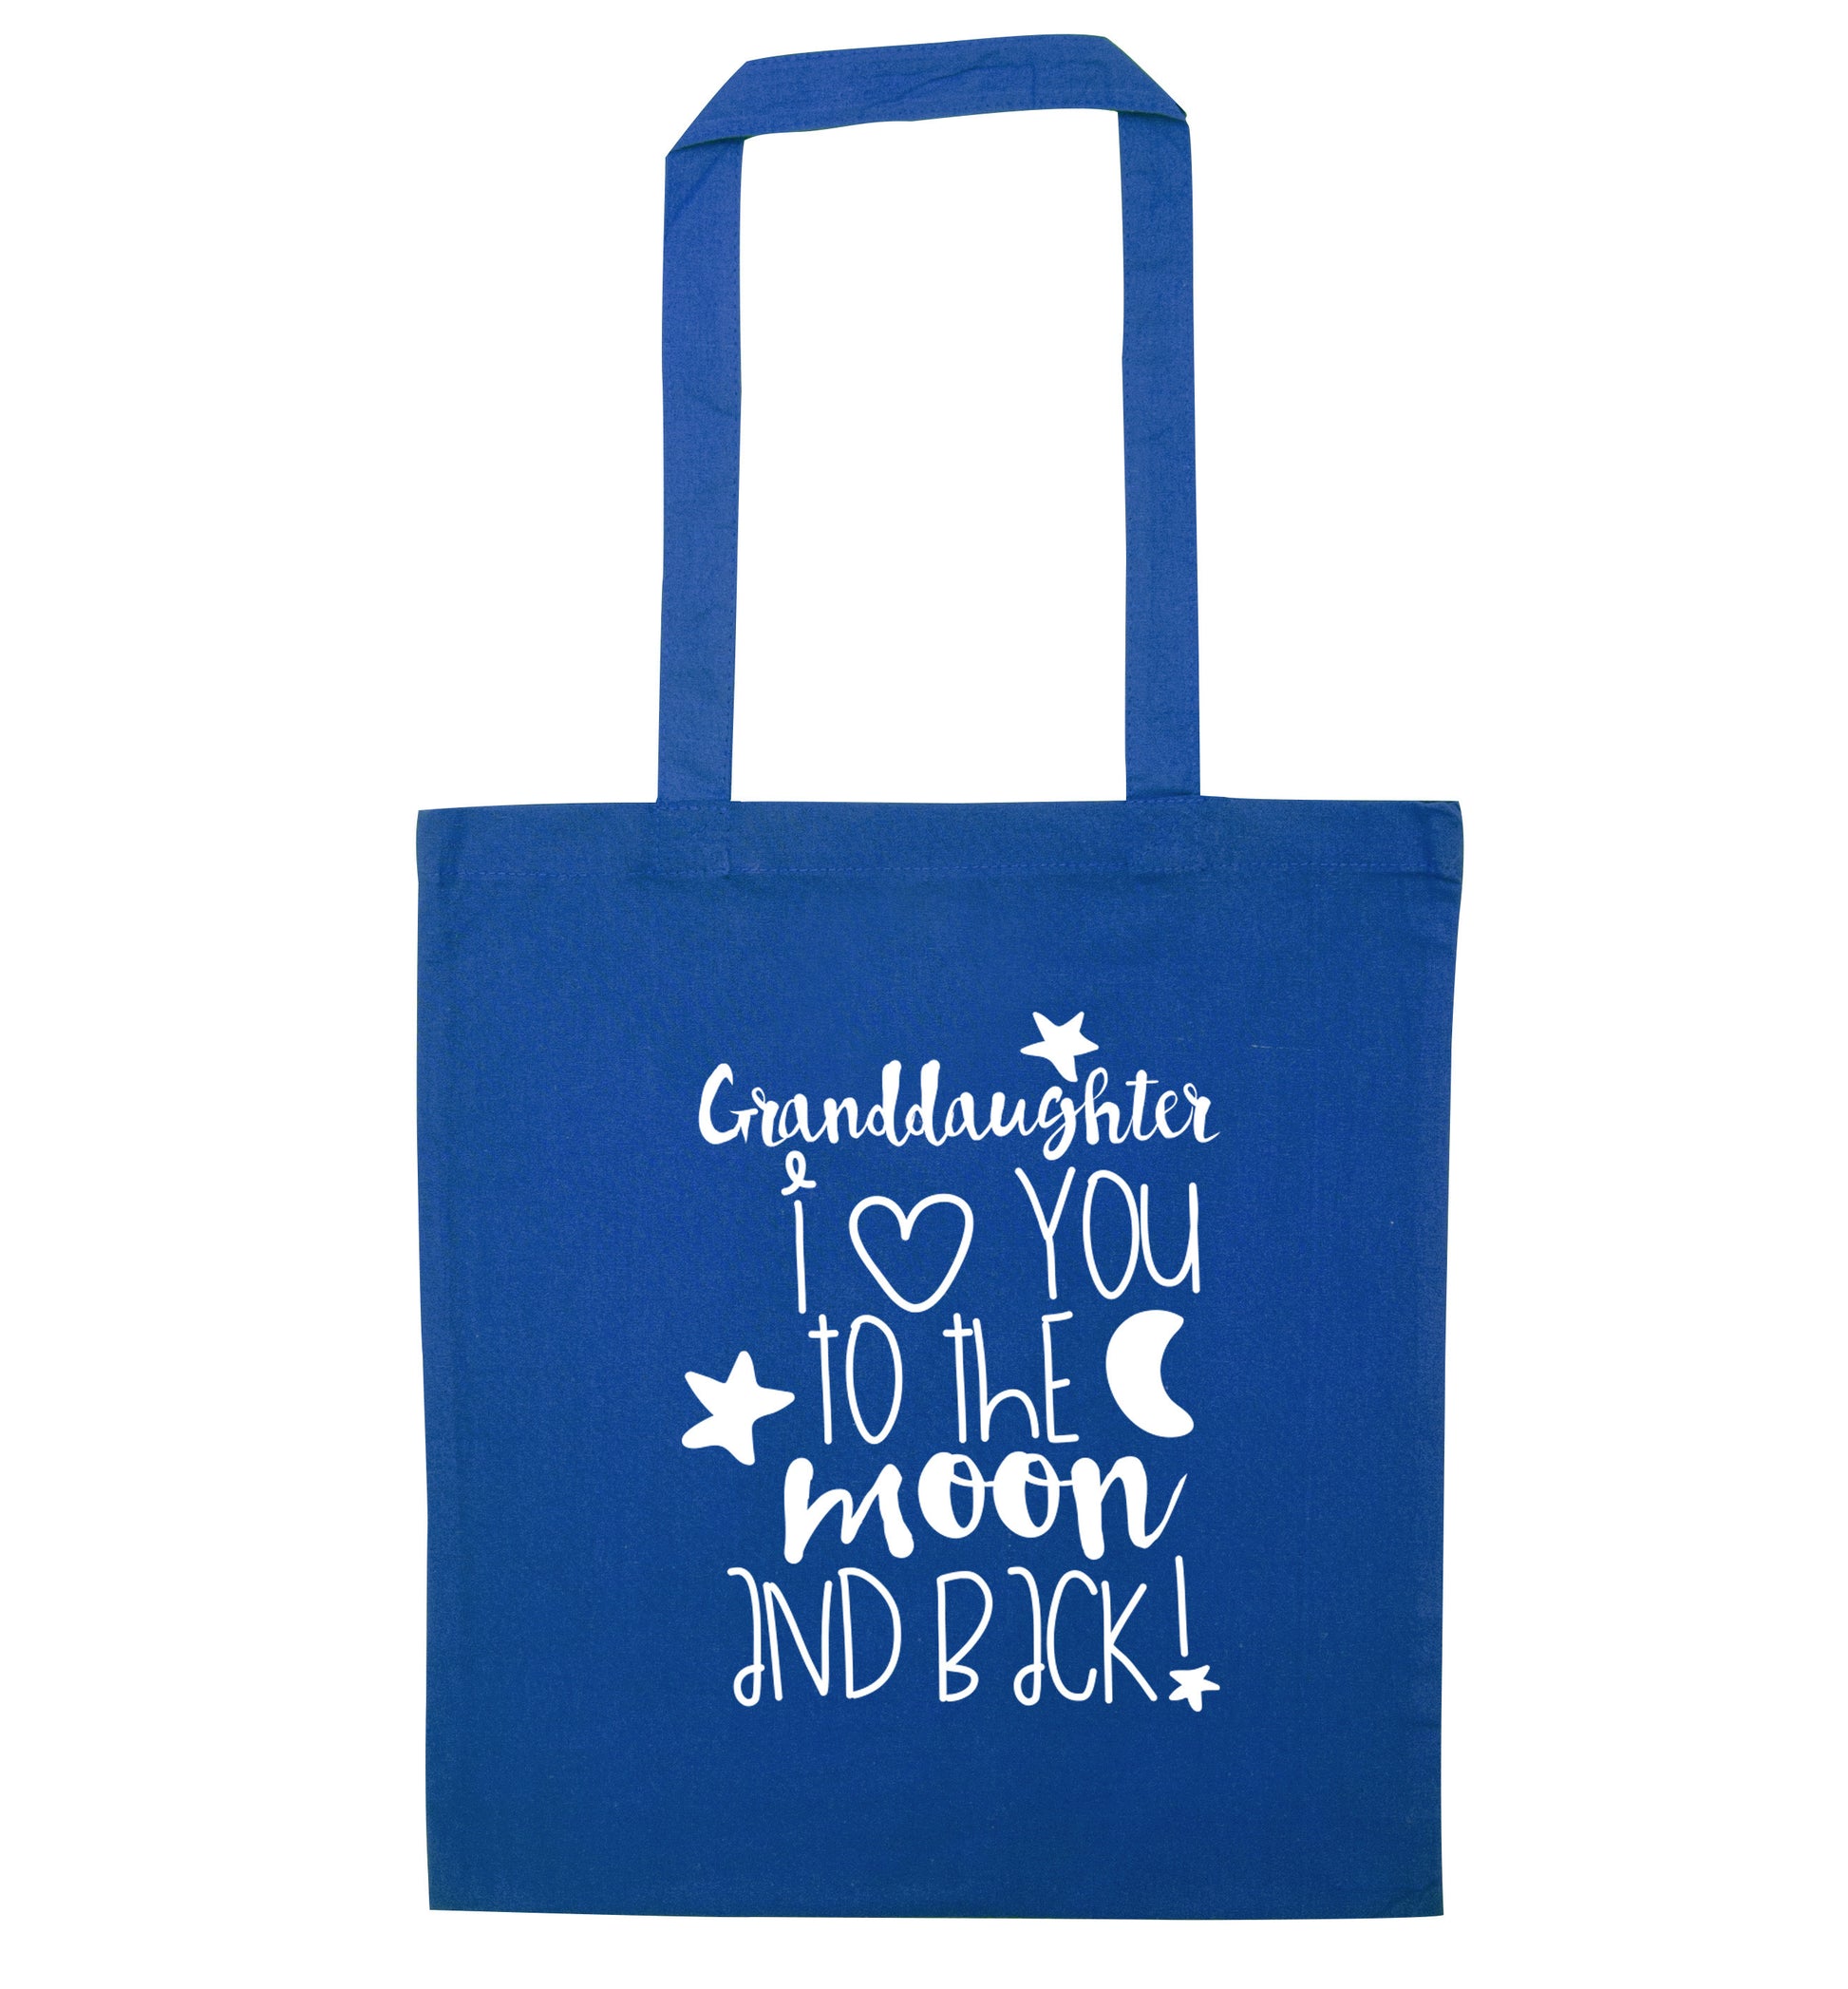 Granddaughter I love you to the moon and back blue tote bag